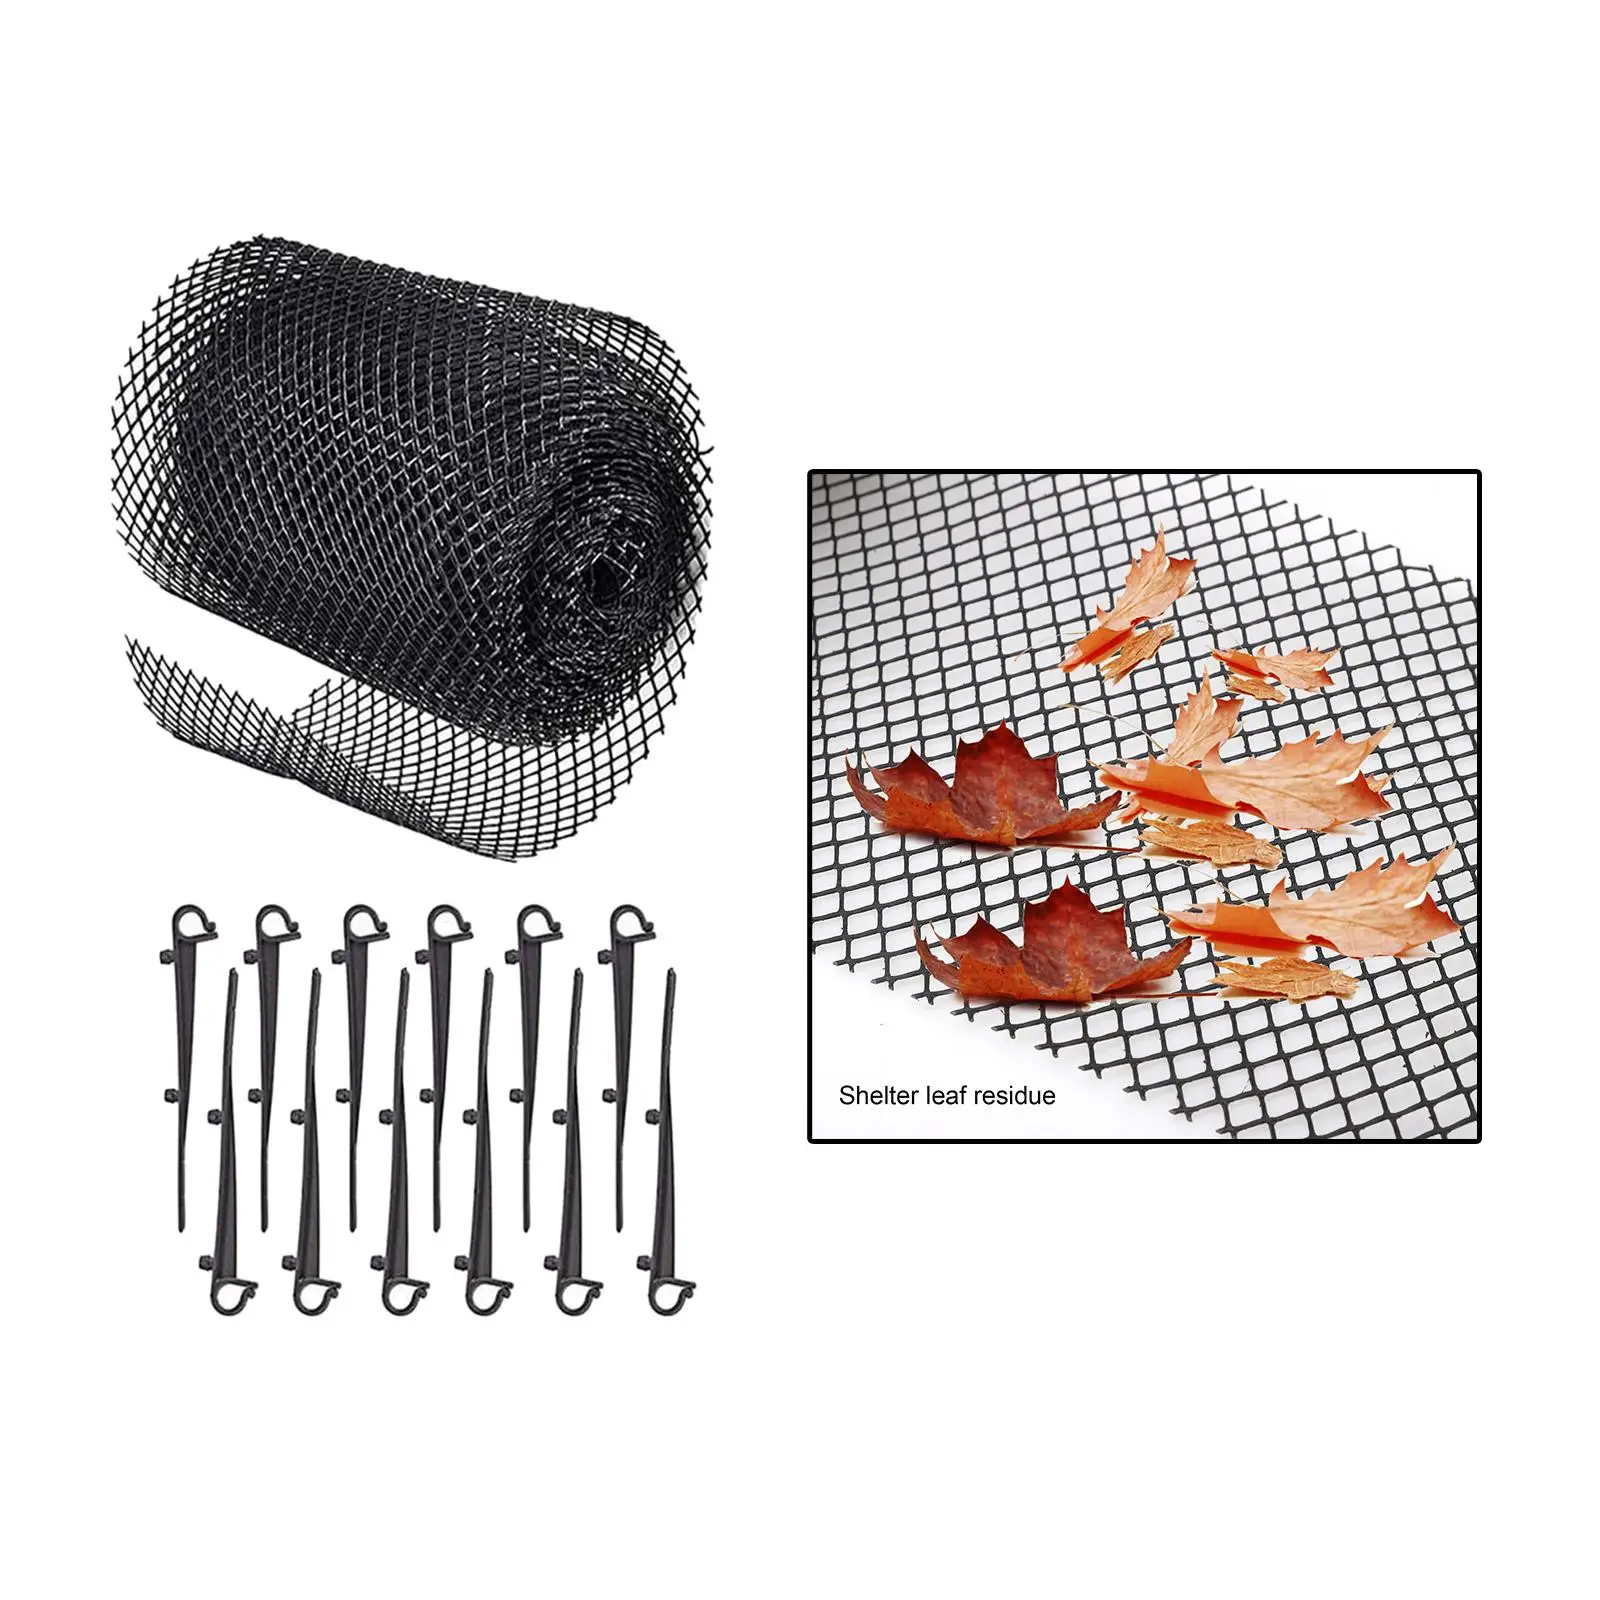 Leaf Guard Mesh Cleaning Tool Flexible 6M with Fixed Hooks Debris Gutter Protector Screen for Park Balcony Garden Yard Parts